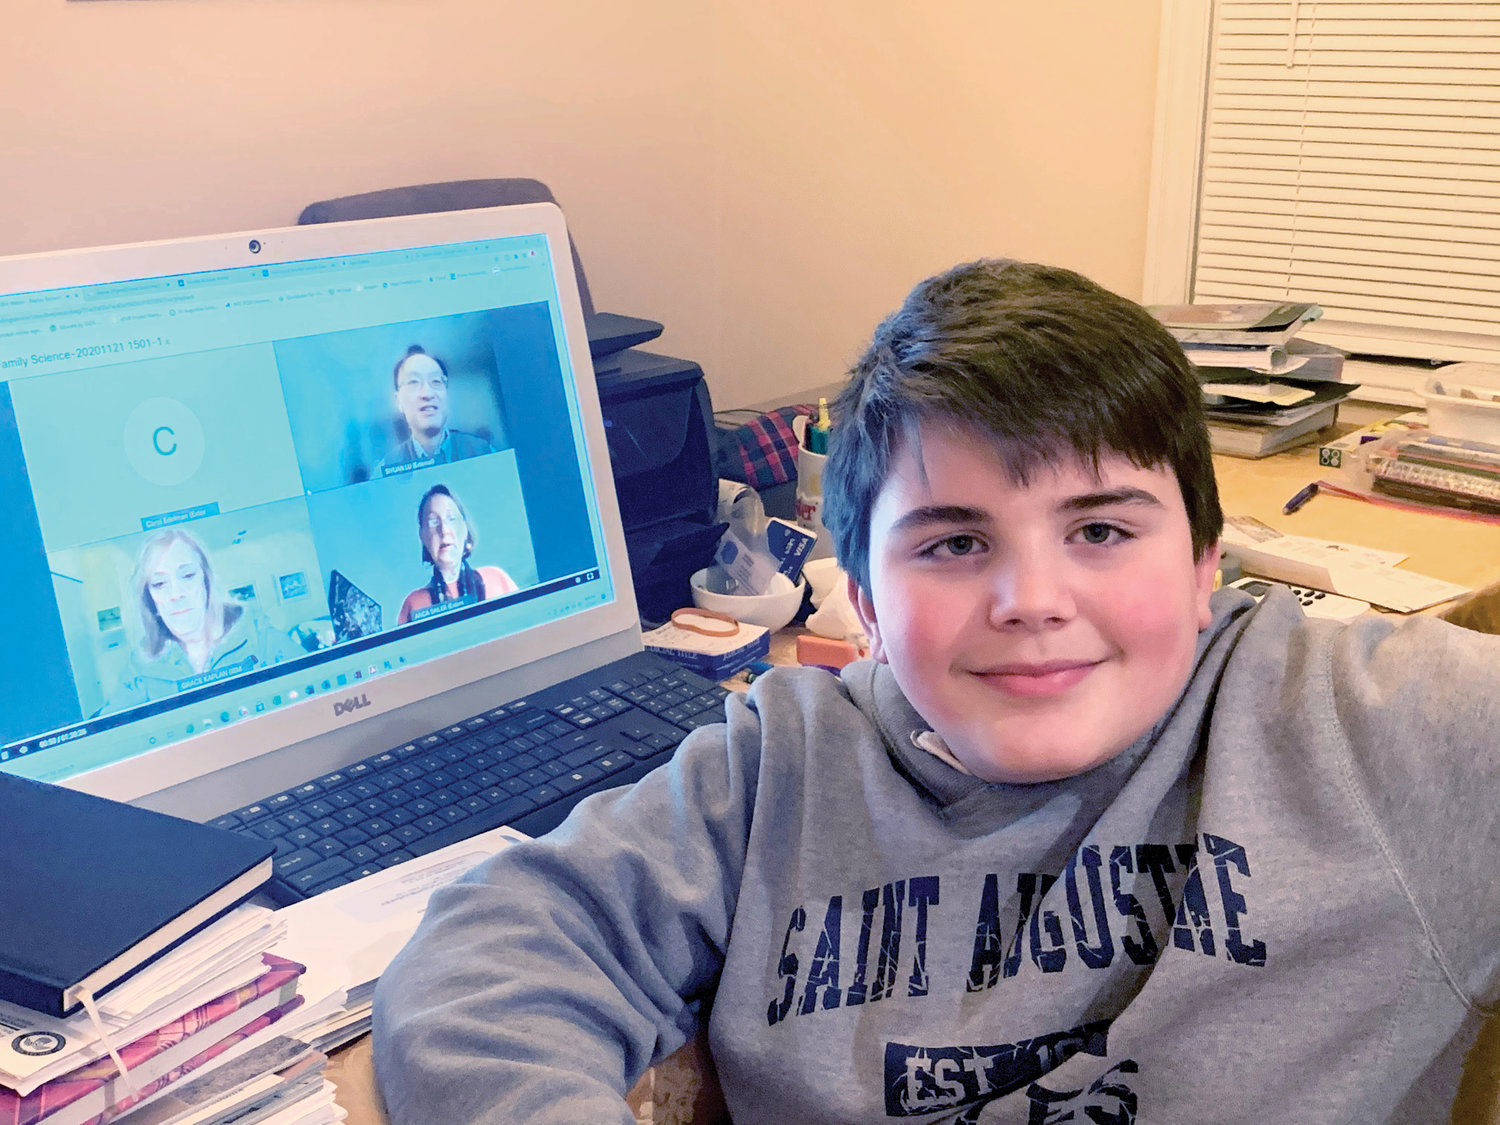 Marco Radeljic is among fifth-grade students of St. Augustine School in Ossining participating in the IBM Family Science Saturday Program. The academic, extracurricular activity covers varied topics within the STEM arena. On Saturday mornings, the students collaborate virtually with IBM experts who volunteer their time for the free educational outreach program.